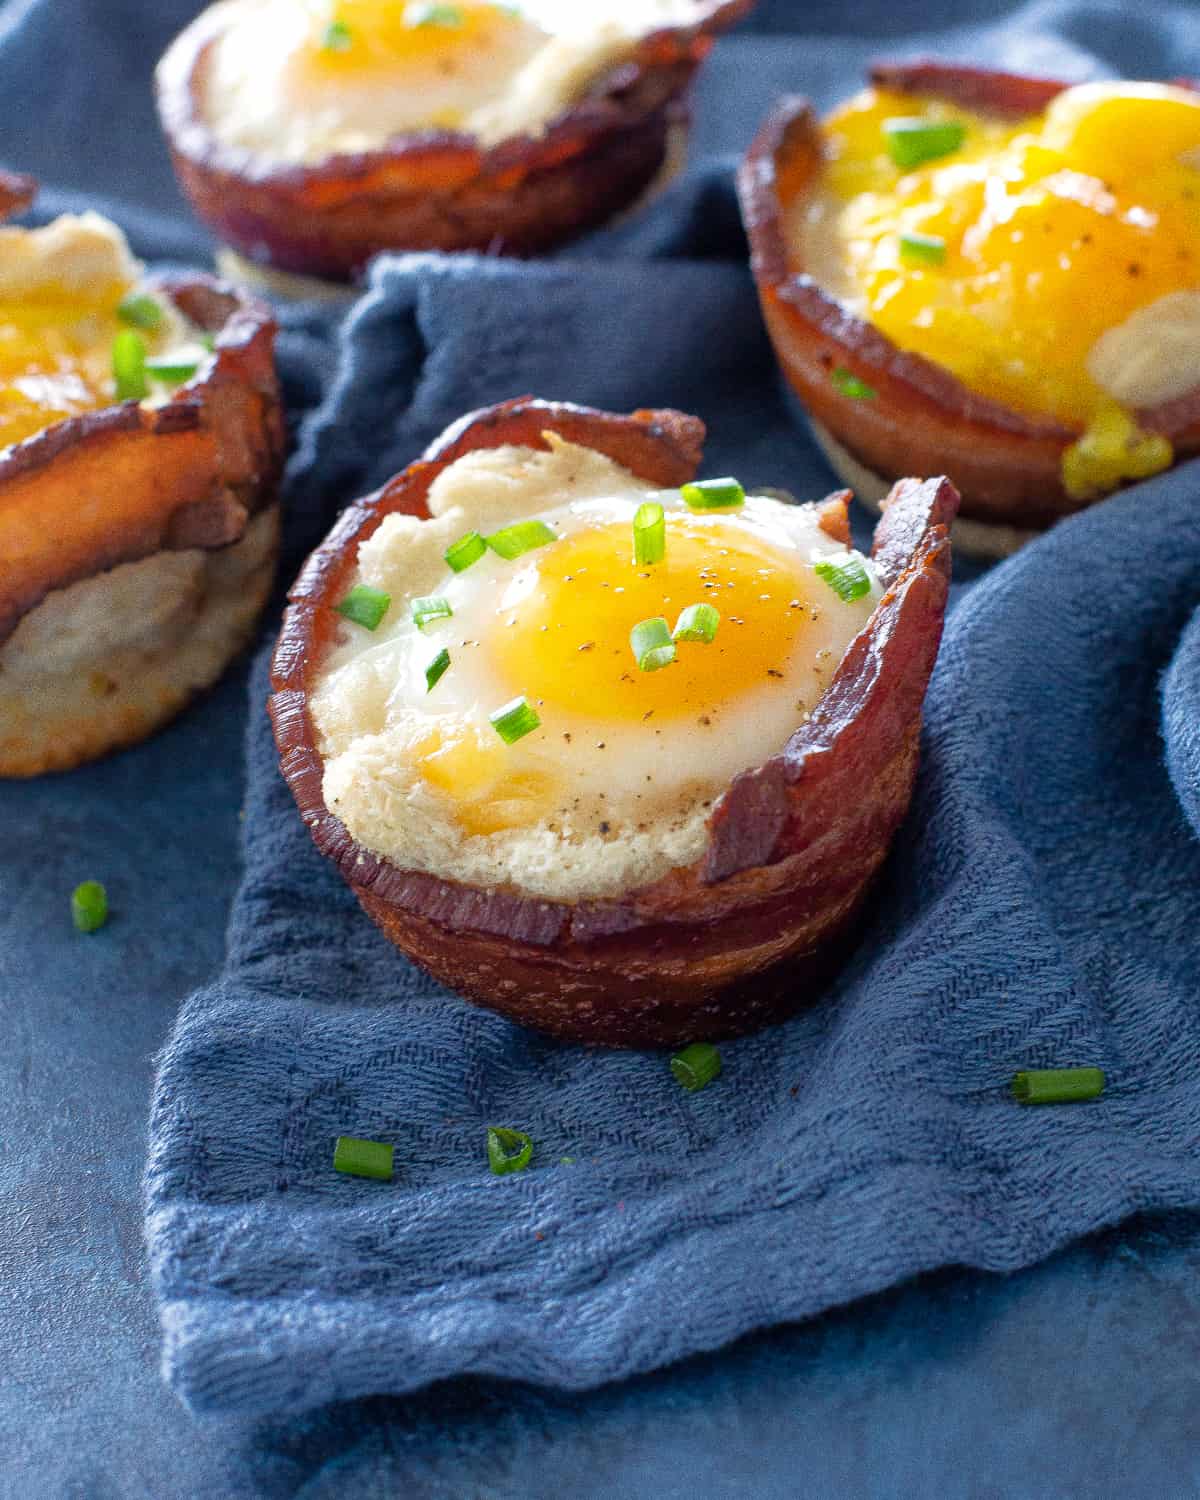 https://www.the-girl-who-ate-everything.com/wp-content/uploads/2010/12/bacon-egg-toast-04.jpg